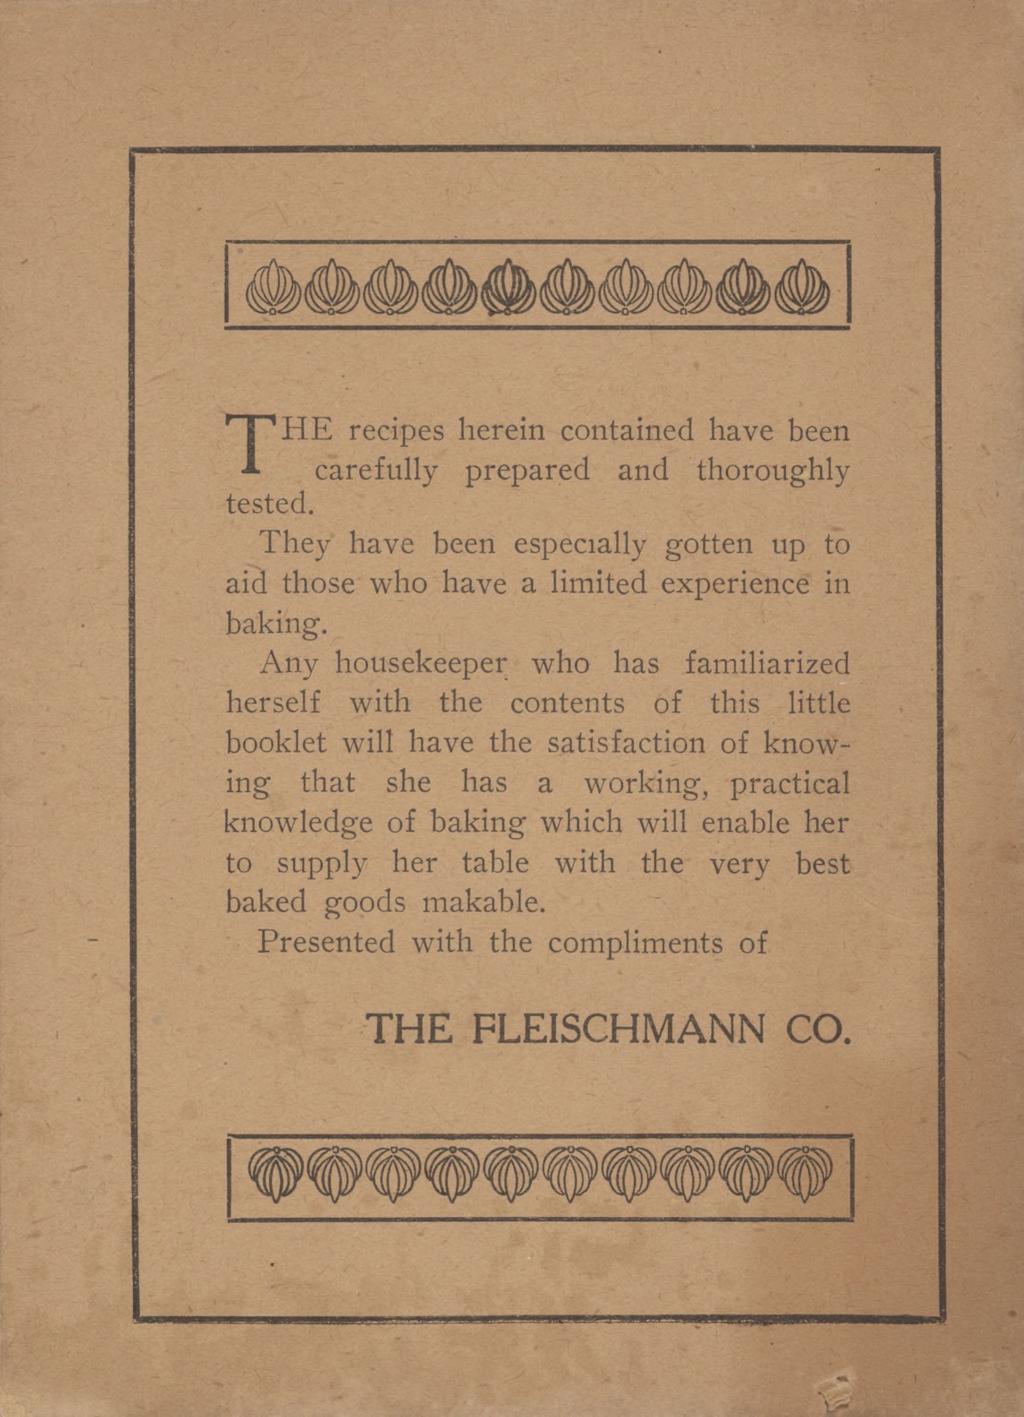 THE recipes herein contained have been carefully prepared and thoroughly tested. They have been especially gotten up to aid those who have a limited experience in baking.